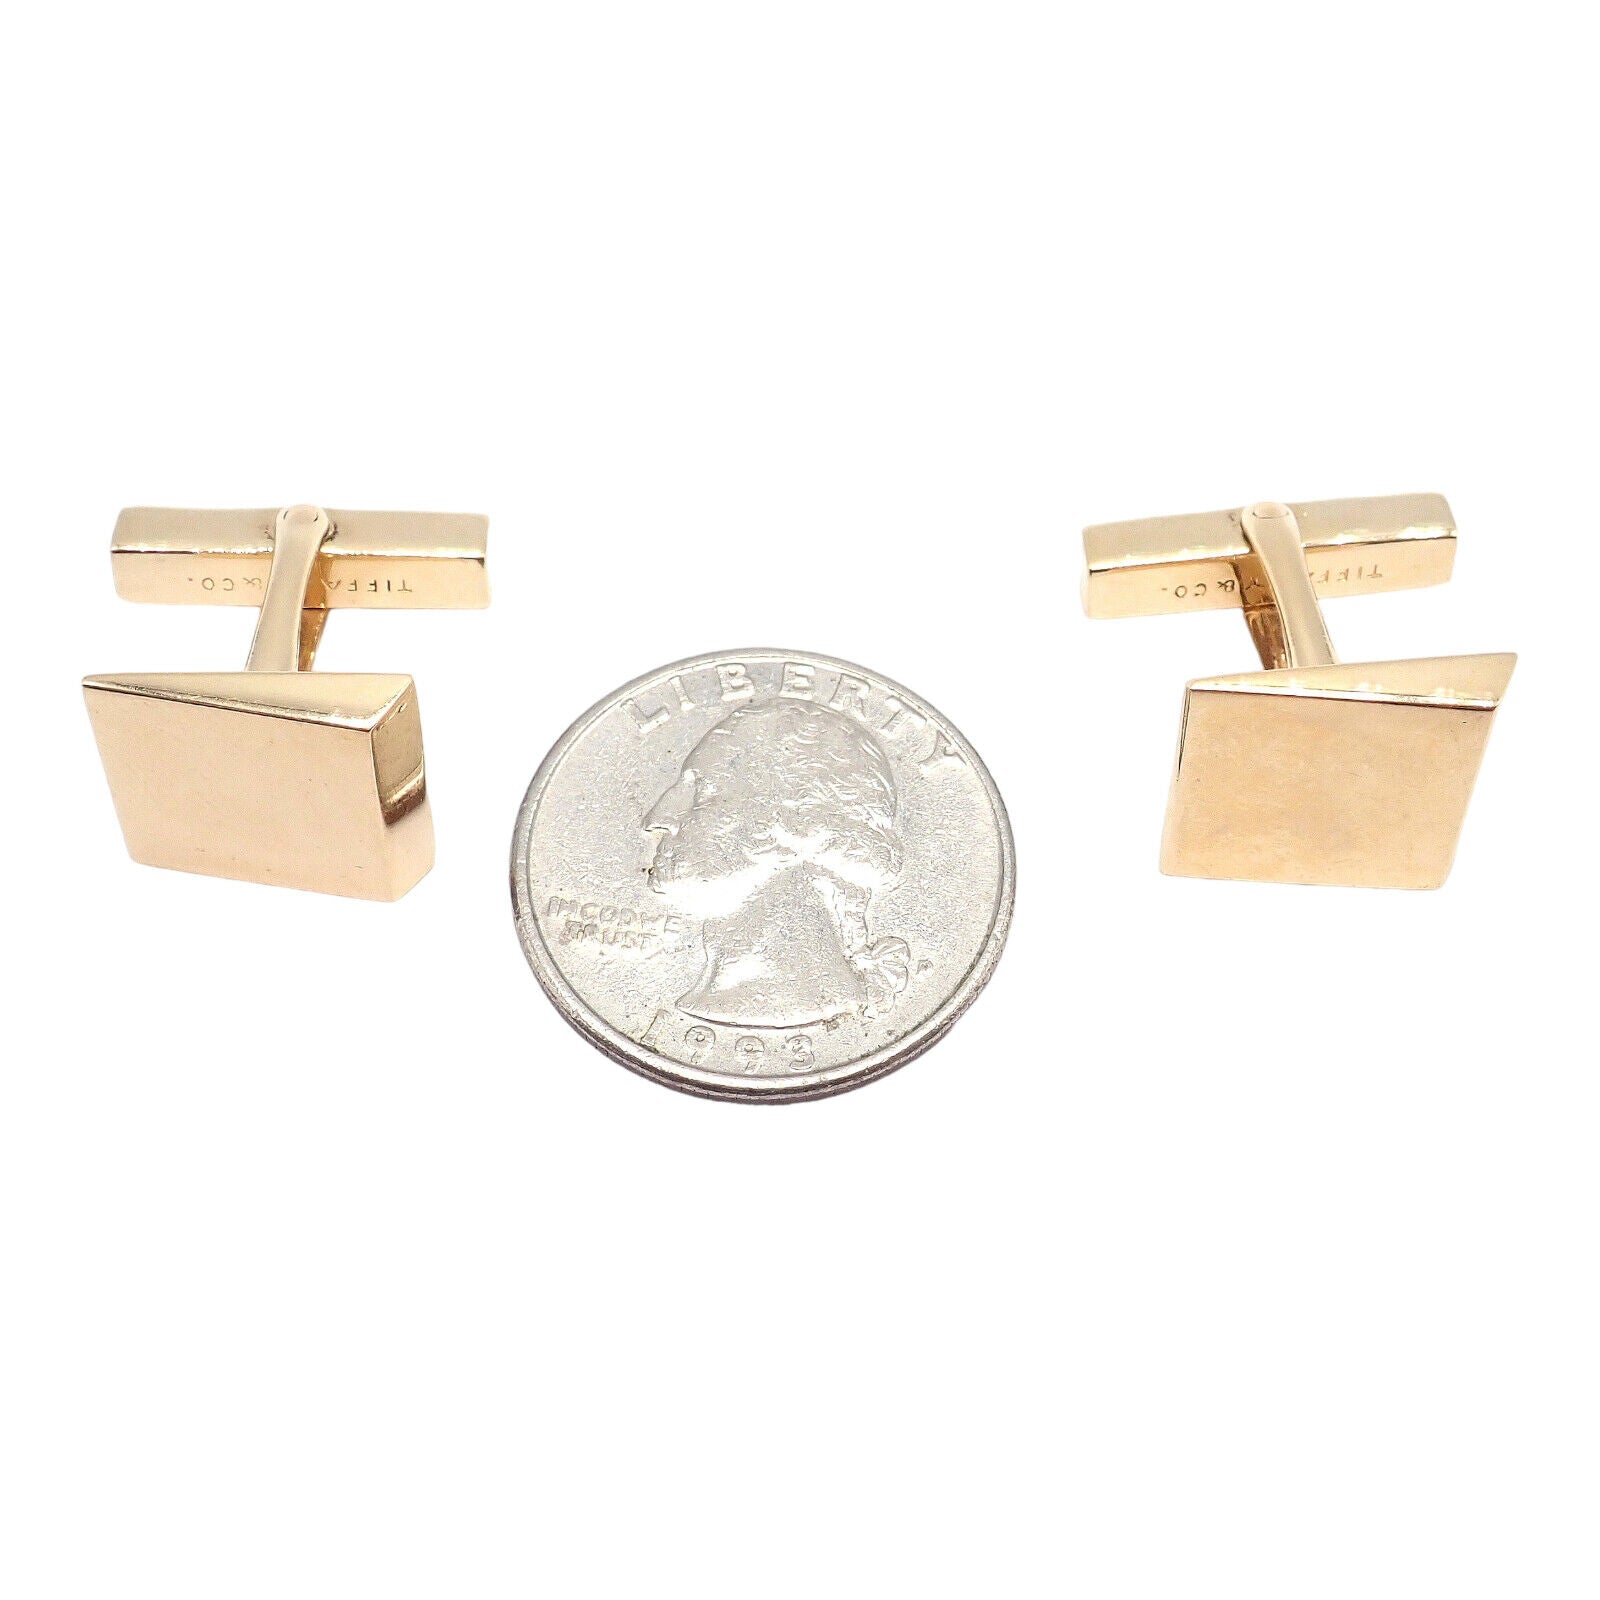 Tiffany & Co. Jewelry & Watches:Men's Jewelry:Cufflinks Vintage Authentic! Tiffany & Co 14k Yellow Gold Square Angled Cufflinks